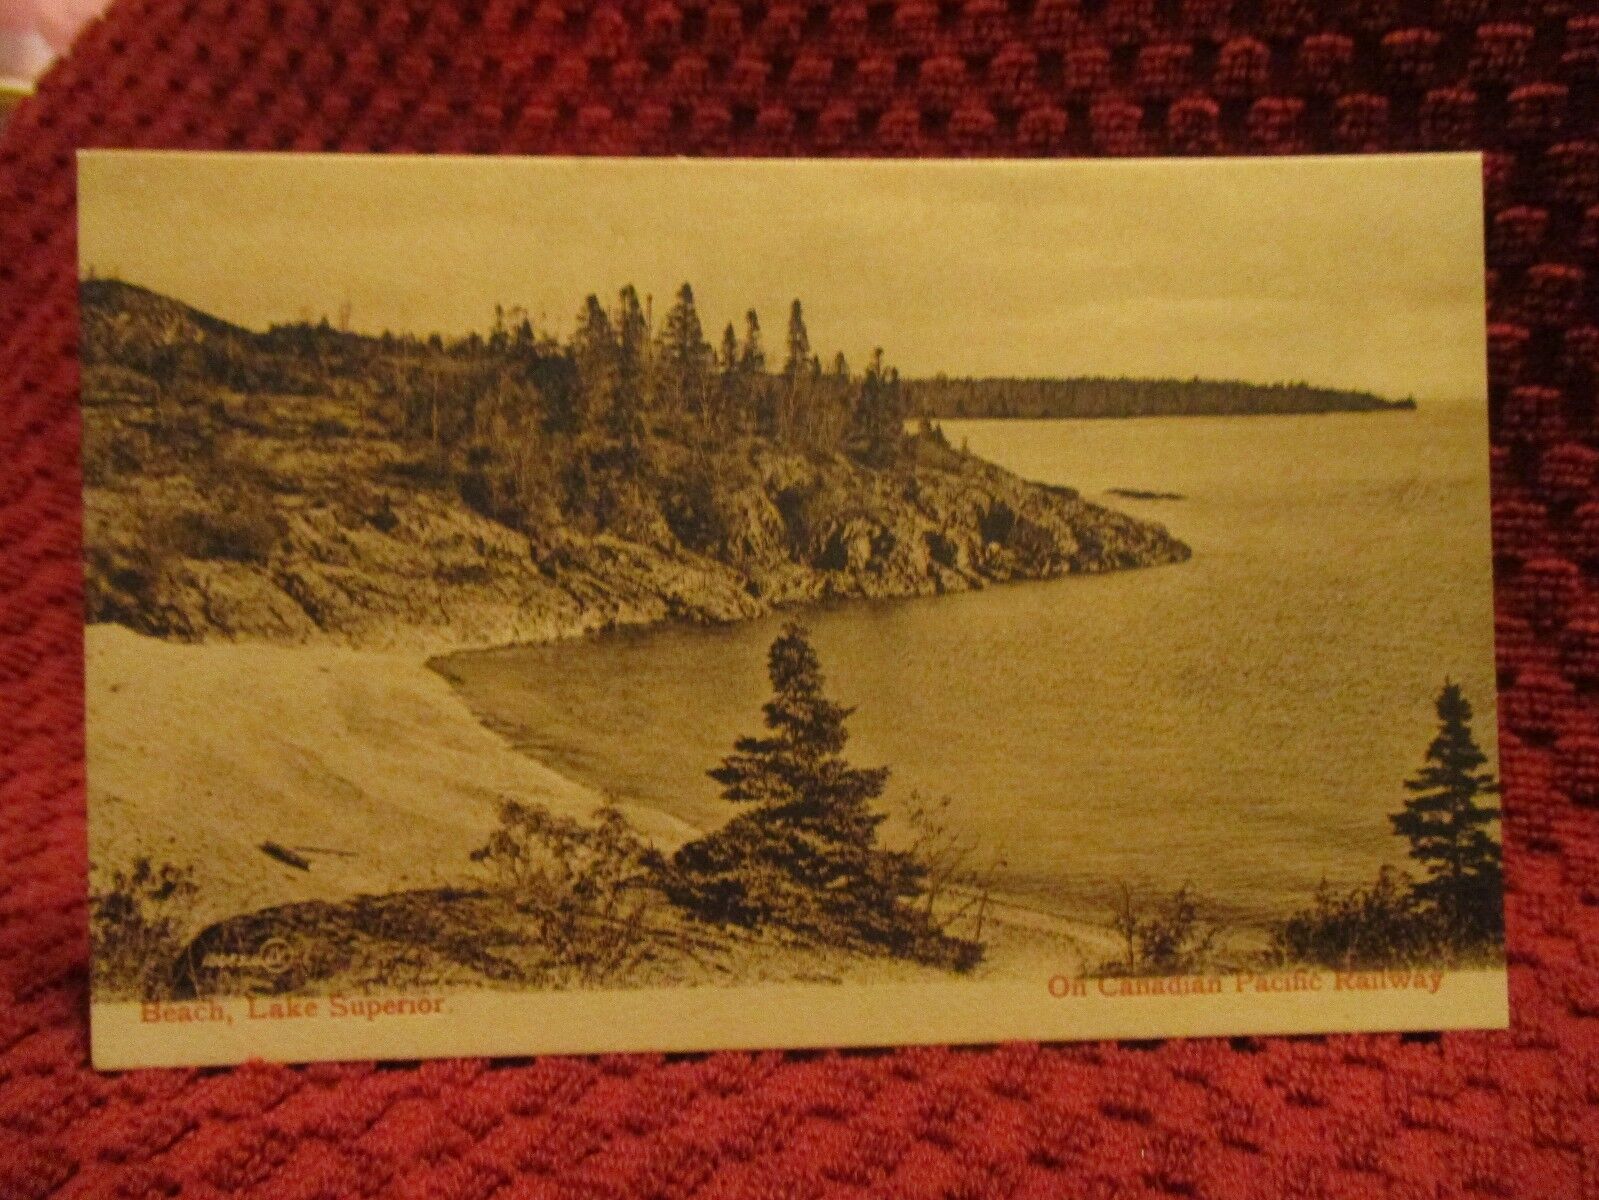 EARLY 1900\'S. BEACH, LAKE SUPERIOR. ON CANADIAN PACIFIC RAILWAY. POSTCARD.